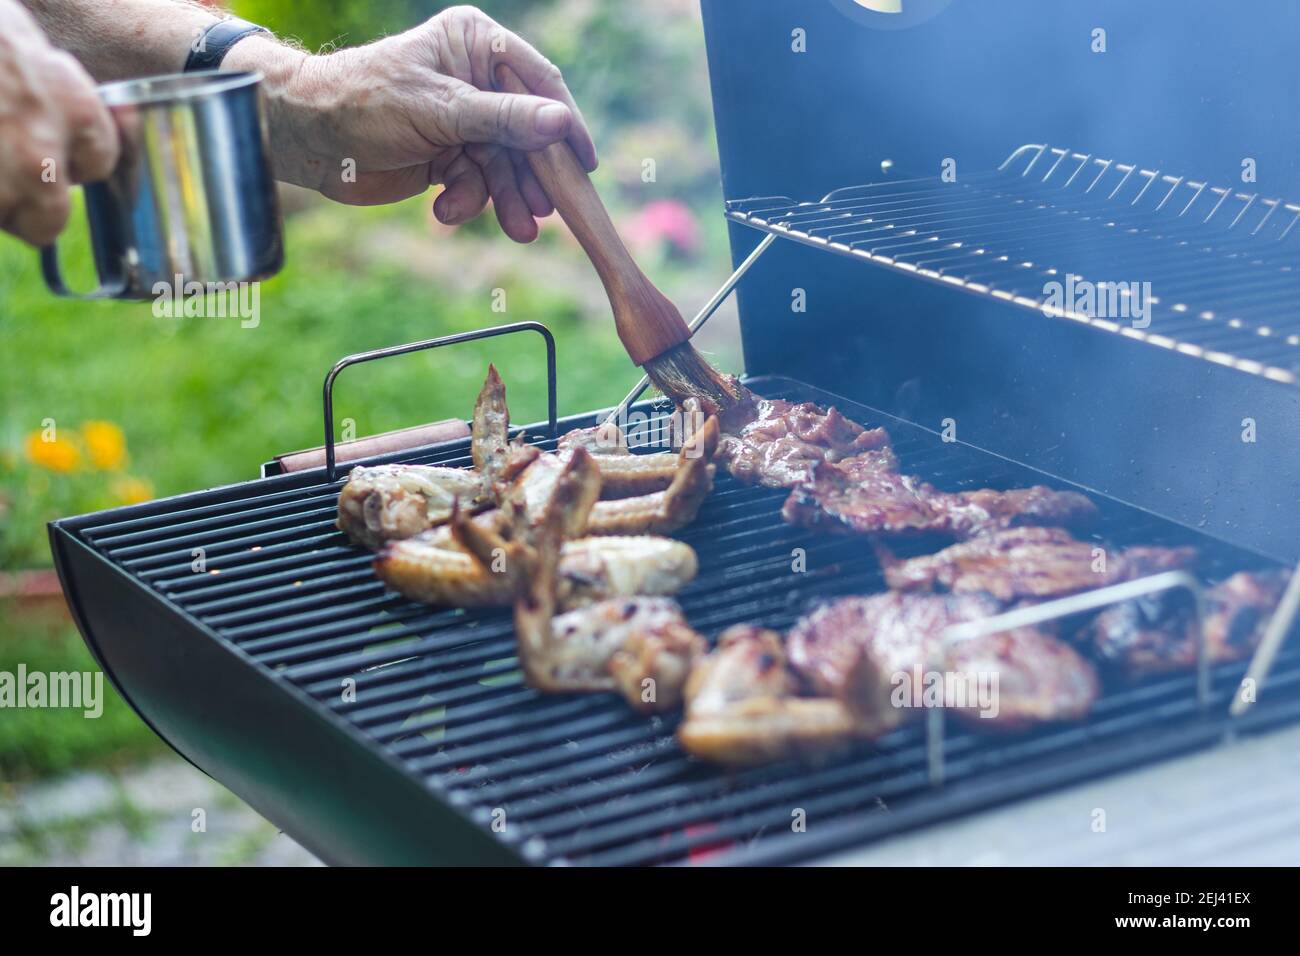 https://c8.alamy.com/comp/2EJ41EX/marinated-meat-on-grill-during-garden-party-summer-barbecue-outdoors-man-with-basting-brush-marinate-grilled-food-2EJ41EX.jpg